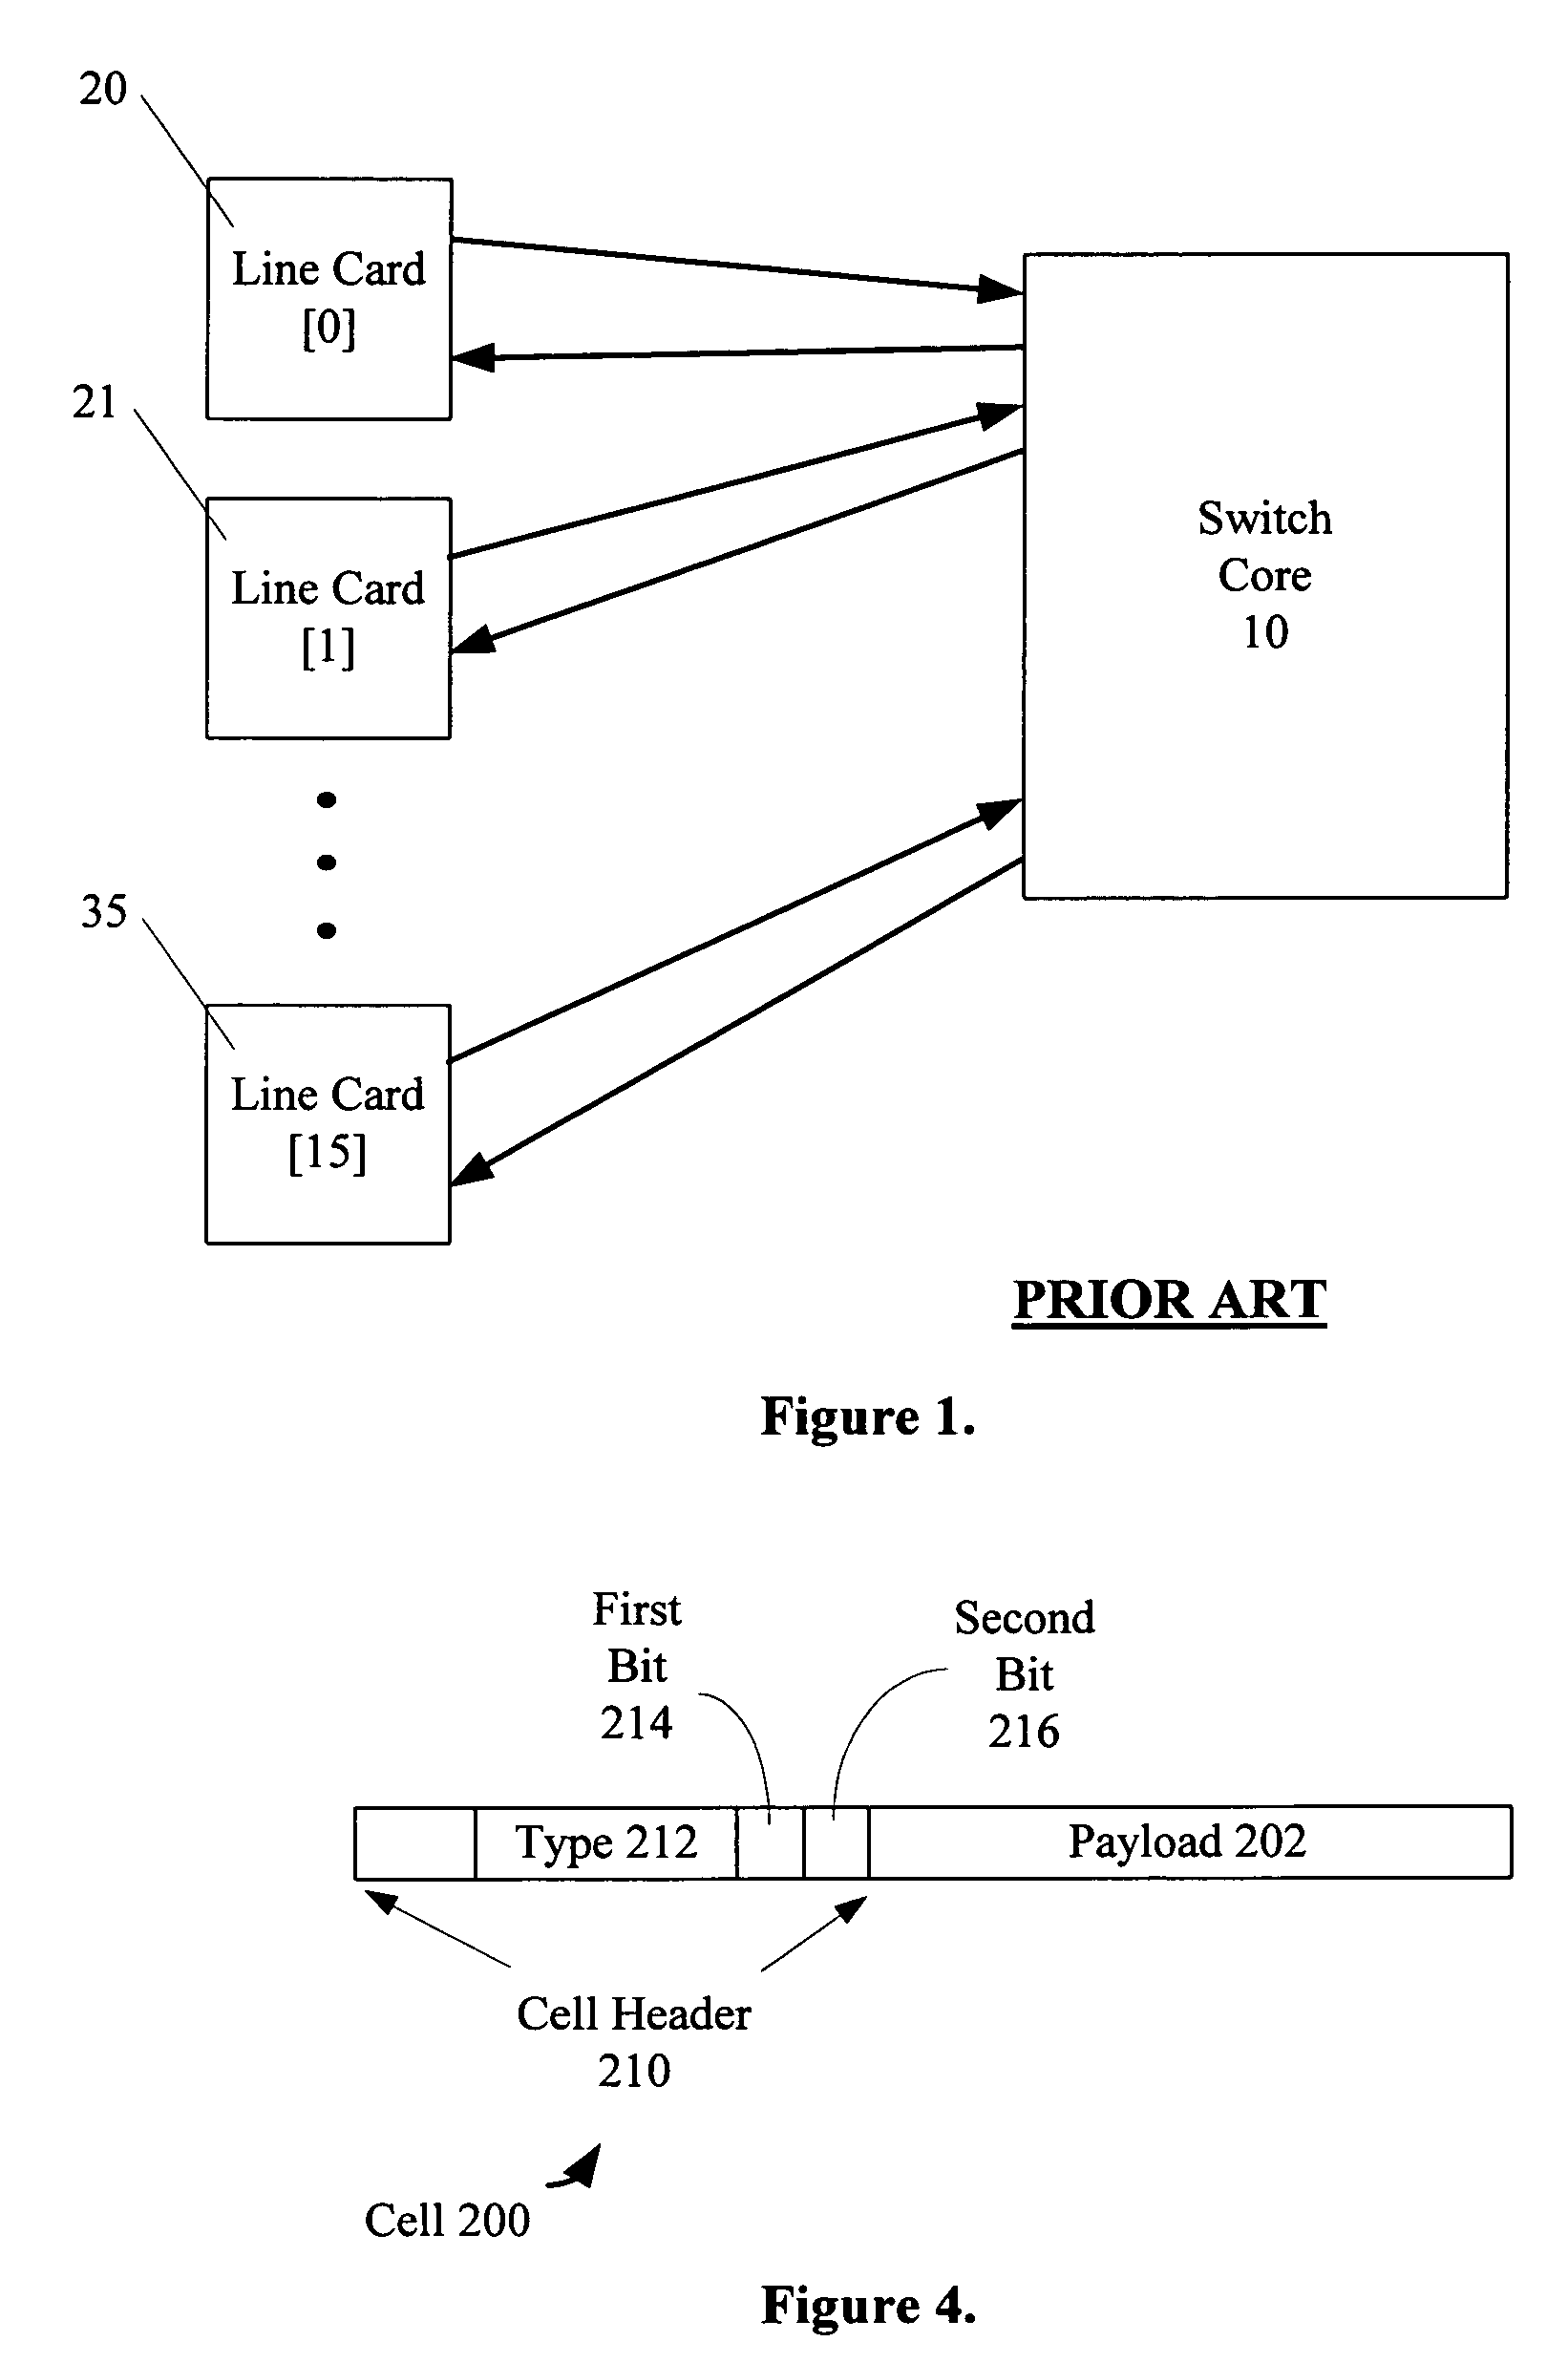 Method and apparatus for line card redundancy in a communication switch